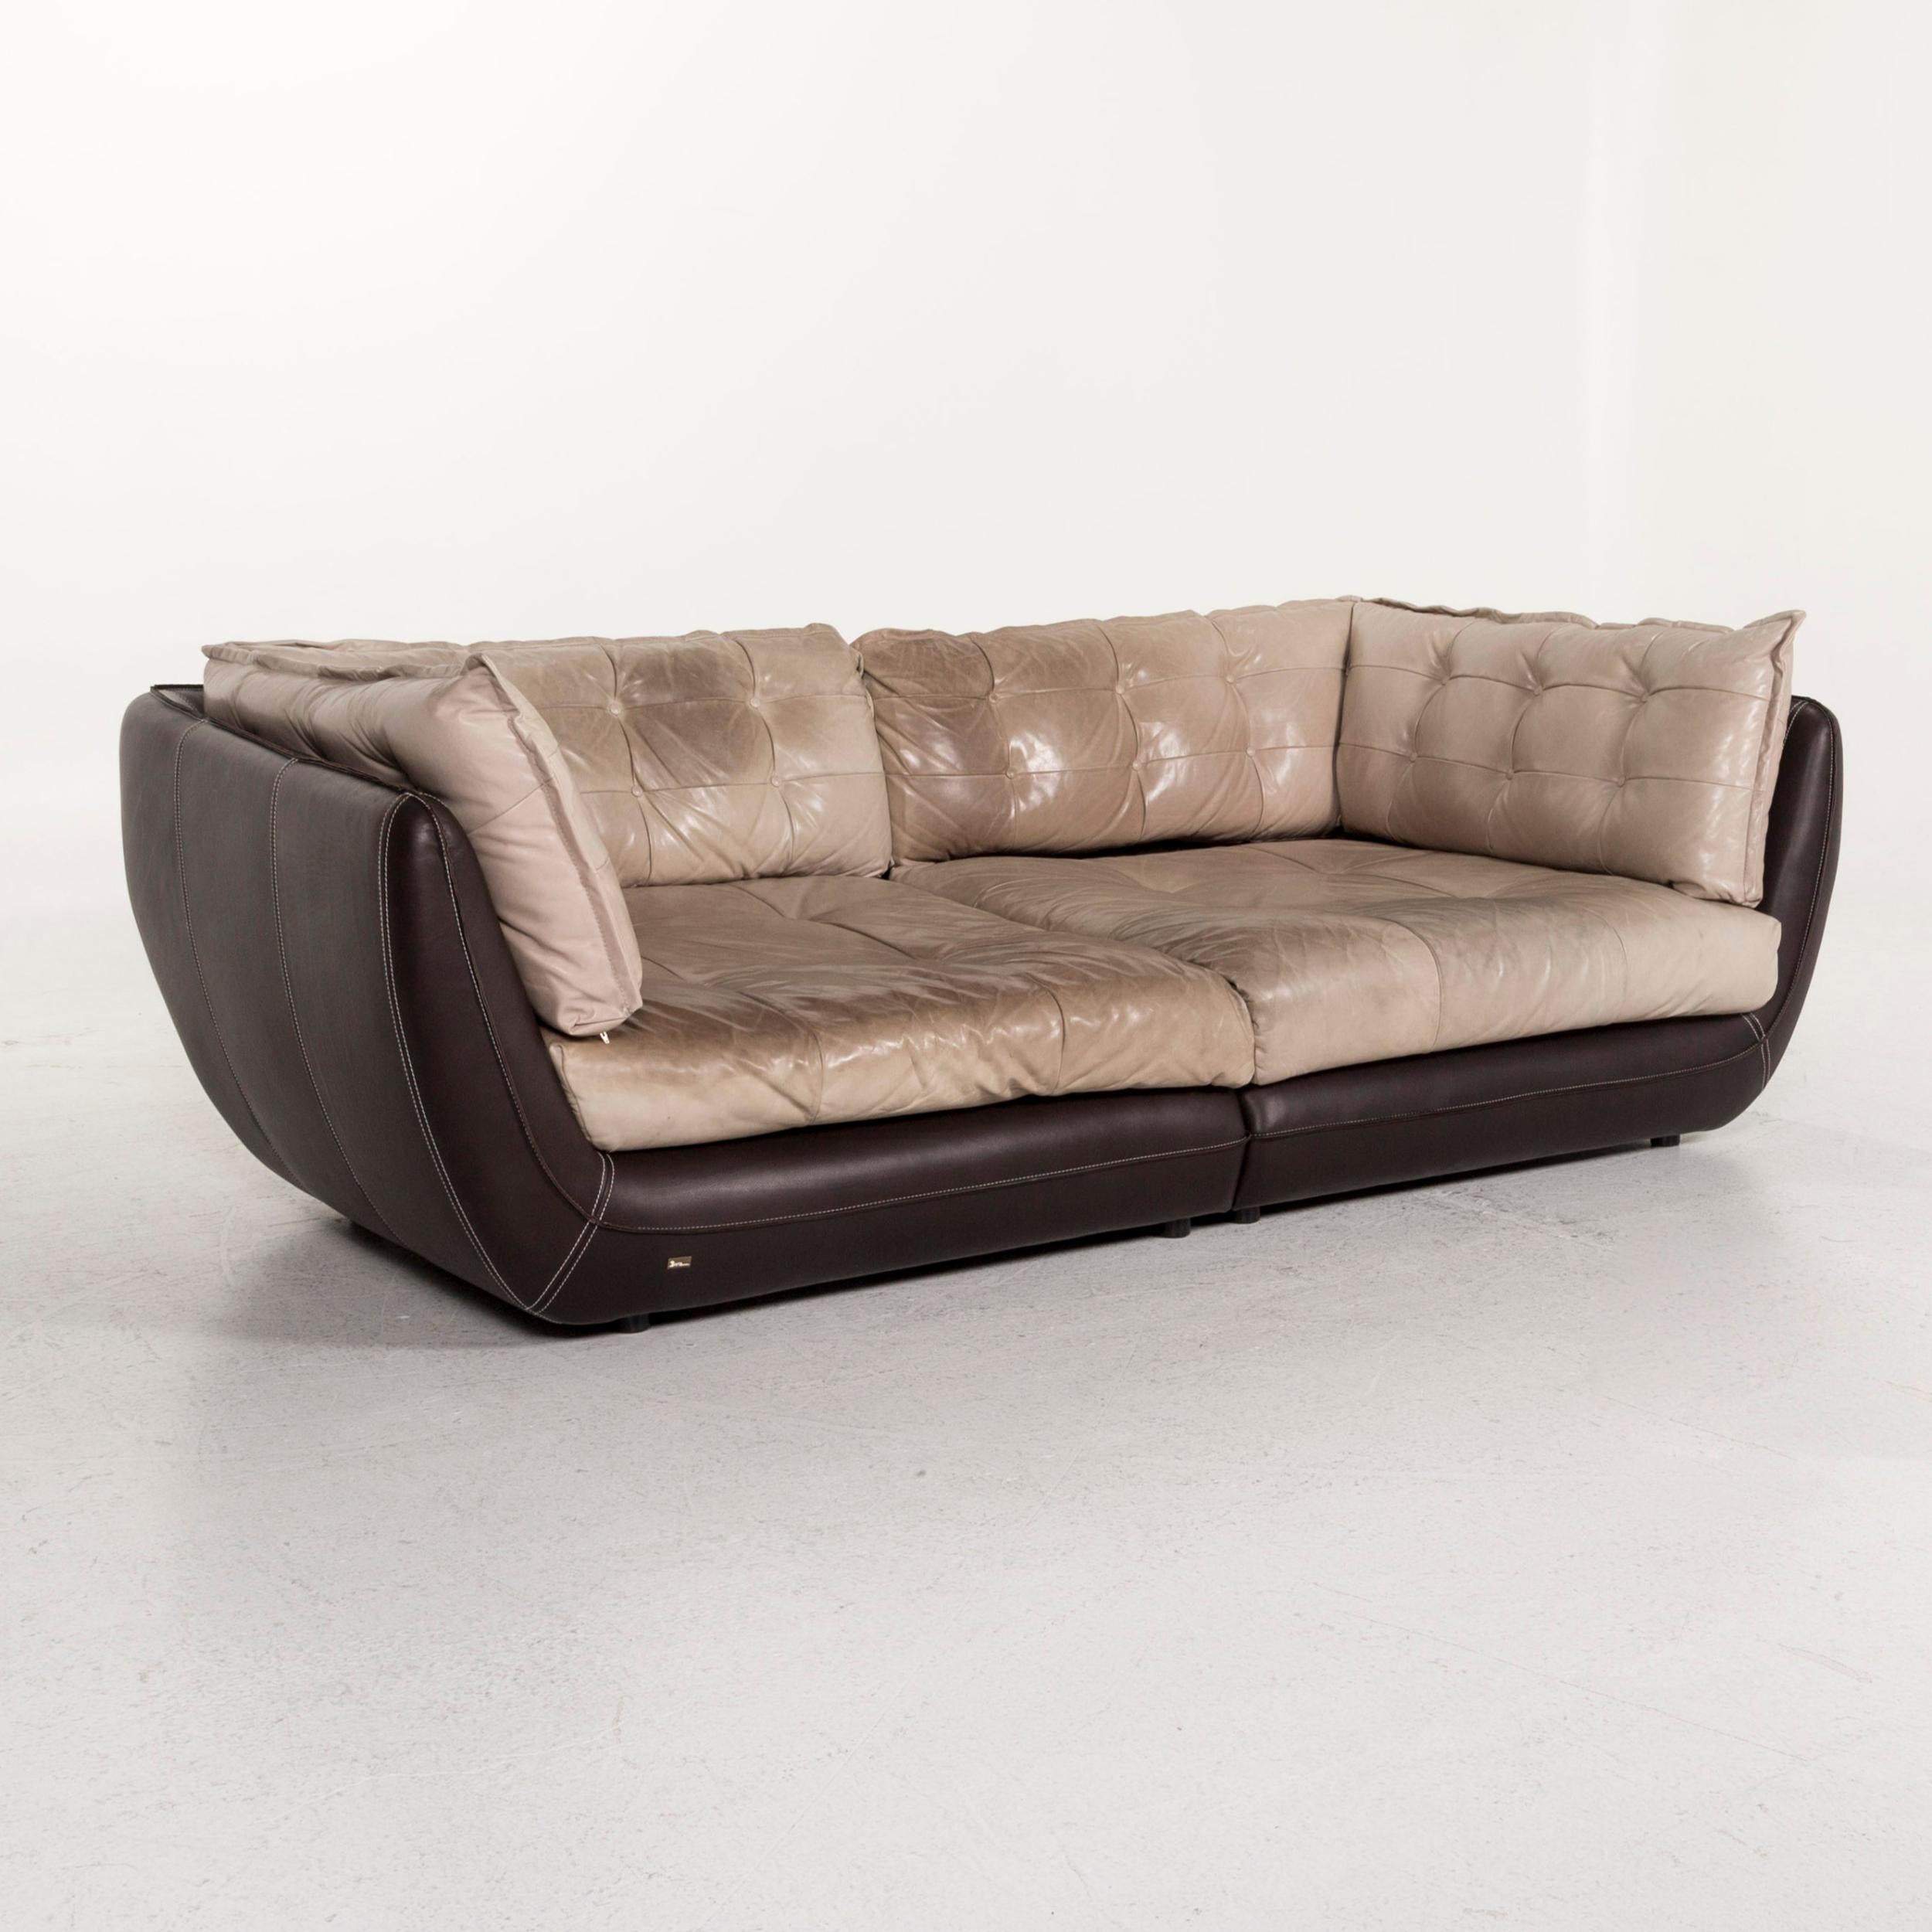 Bretz Cupcake Jepard Leather Sofa Brown Beige Four-Seat Couch In Fair Condition For Sale In Cologne, DE